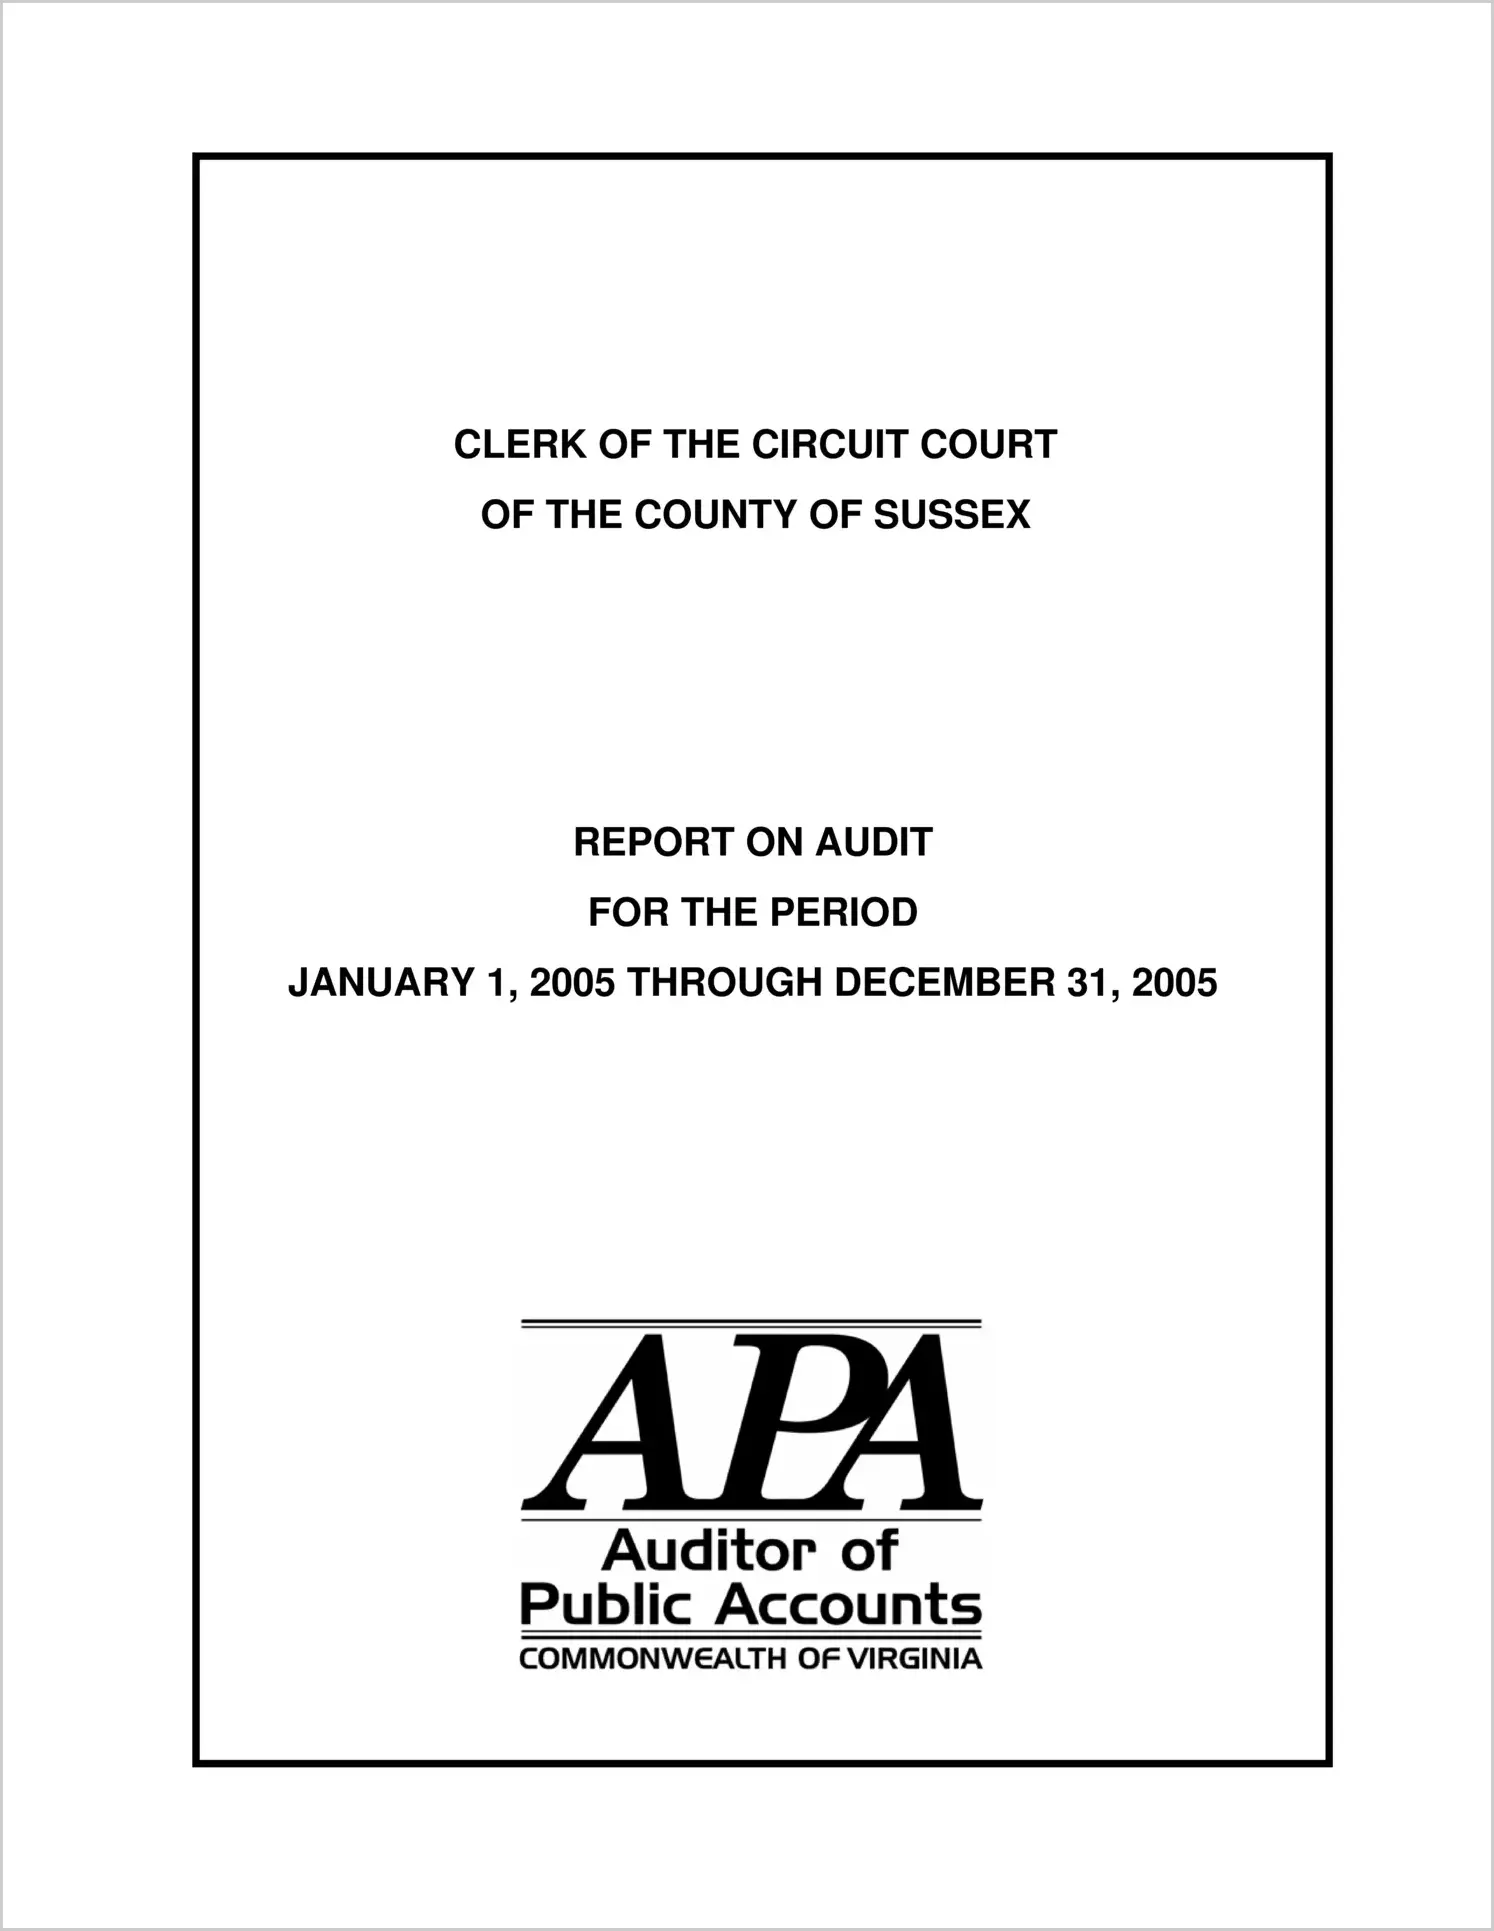 Clerk of the Circuit Court of the County of Sussex for the period January 1, 2005 through December 31, 2005